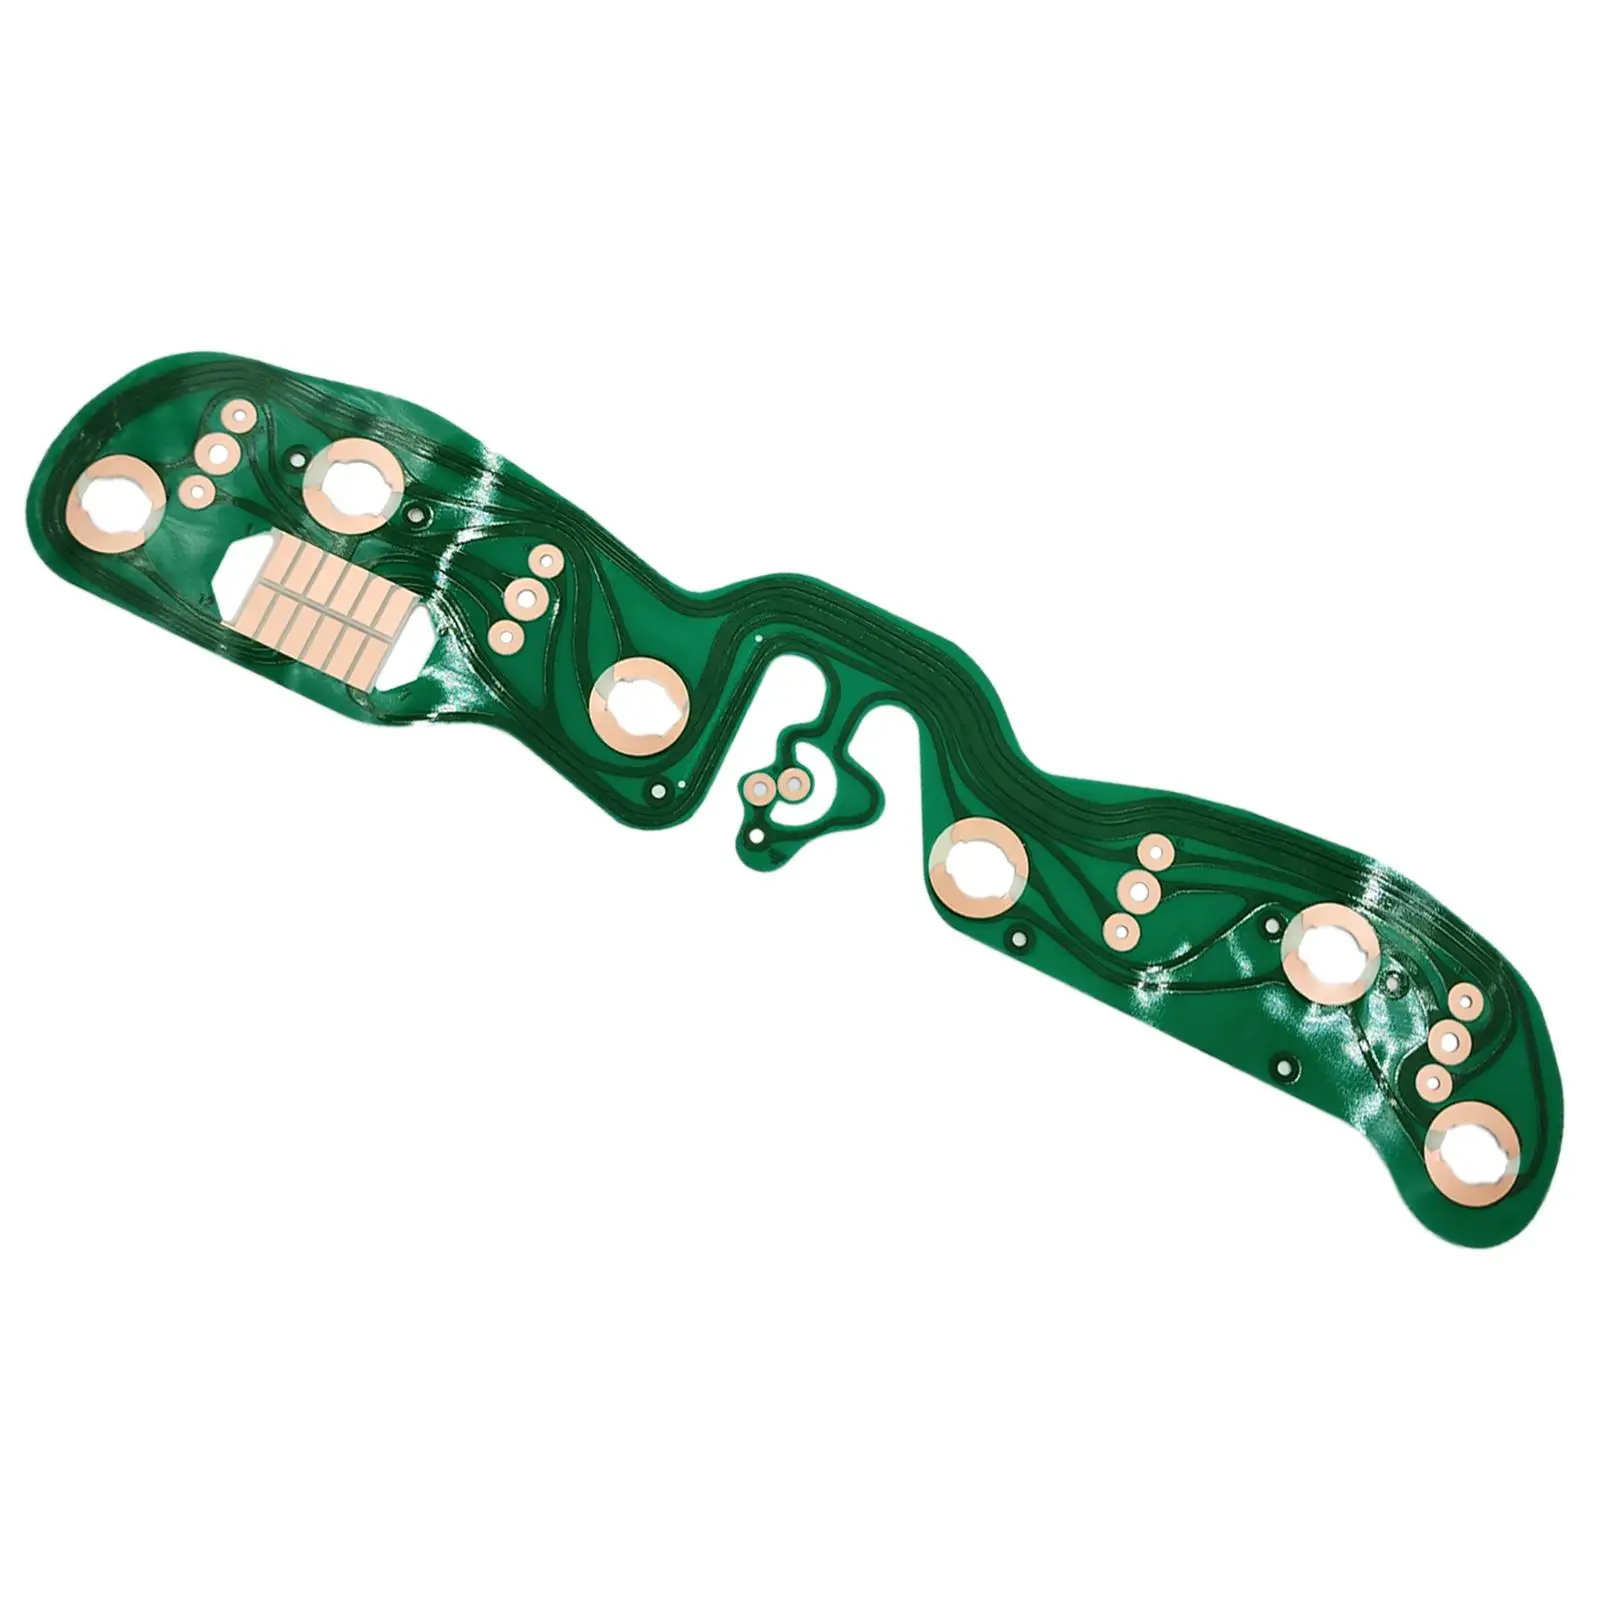 Gauges Printed Circuit Board for Jeep Wrangler Easy to Install Durable